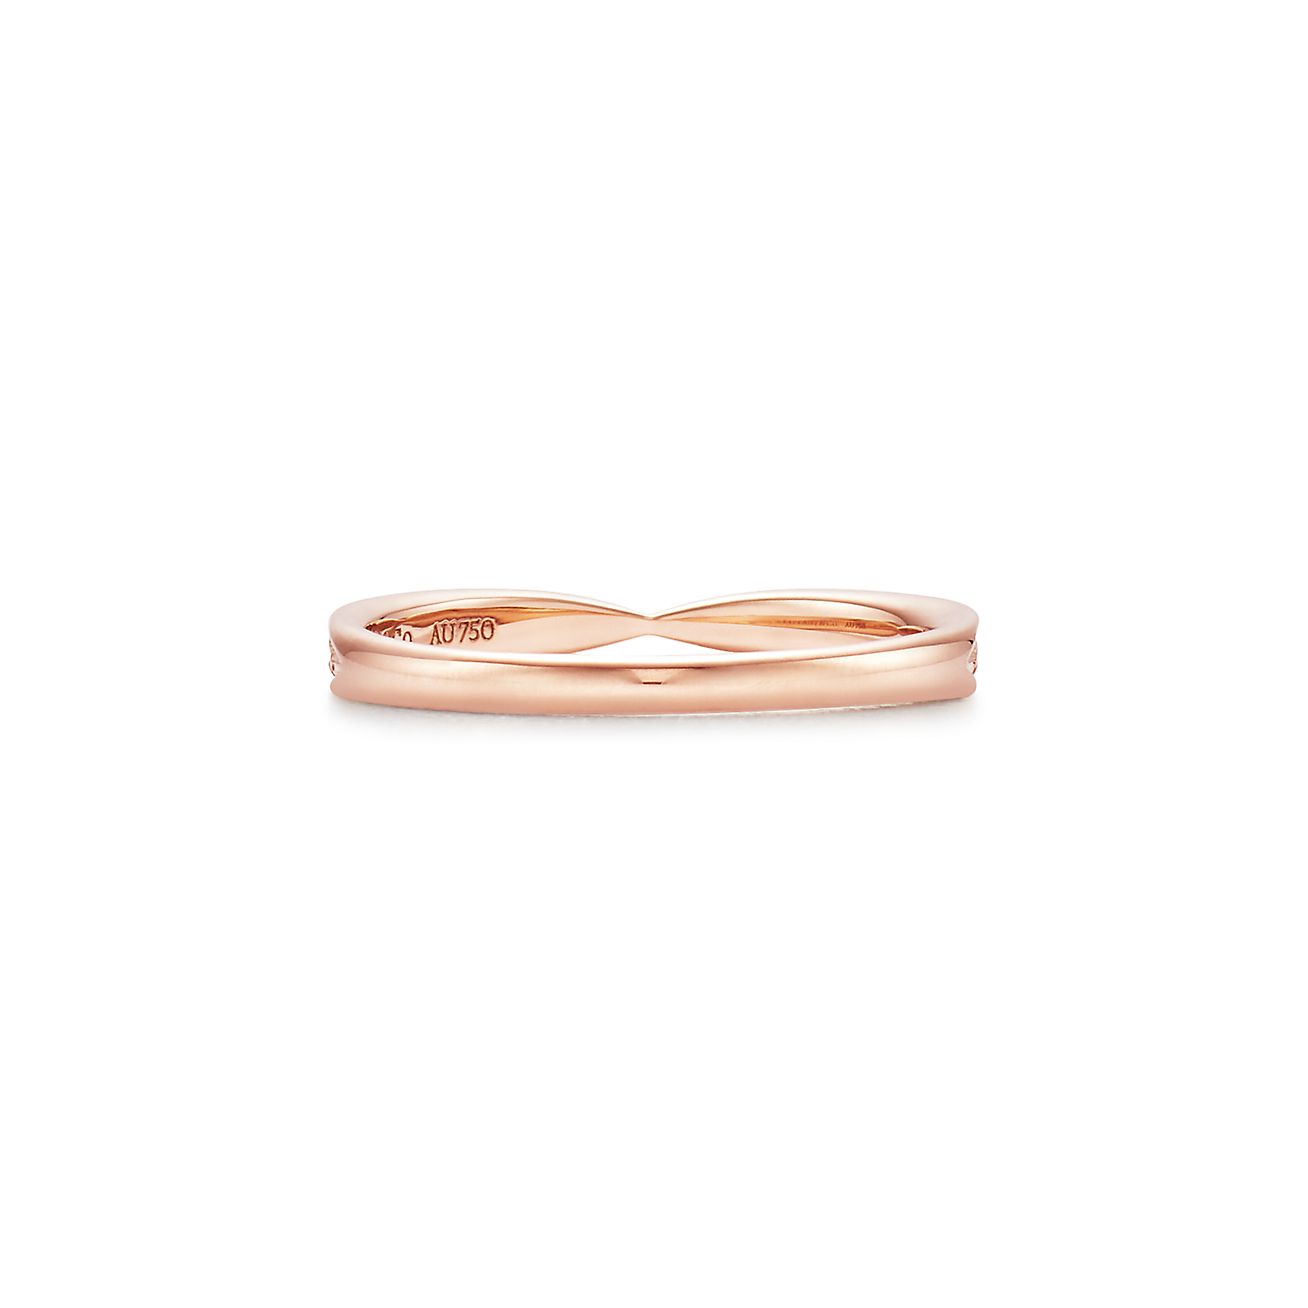 Tiffany Harmony® Band Ring in Rose Gold with Diamonds, 1.8 mm